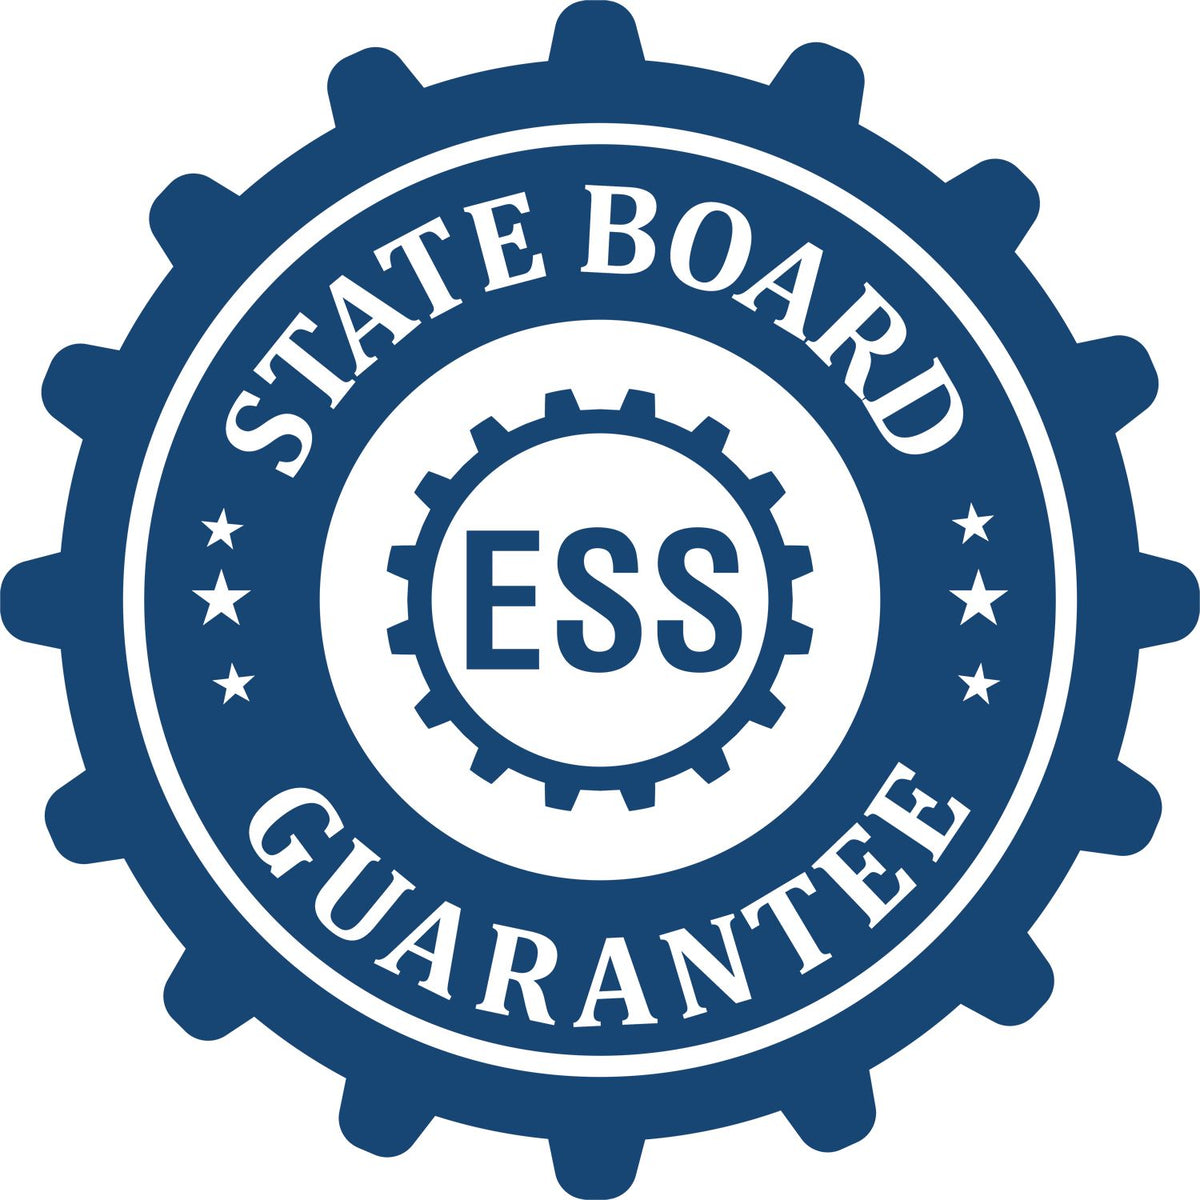 An emblem in a gear shape illustrating a state board guarantee for the Hawaii Desk Architect Embossing Seal product.